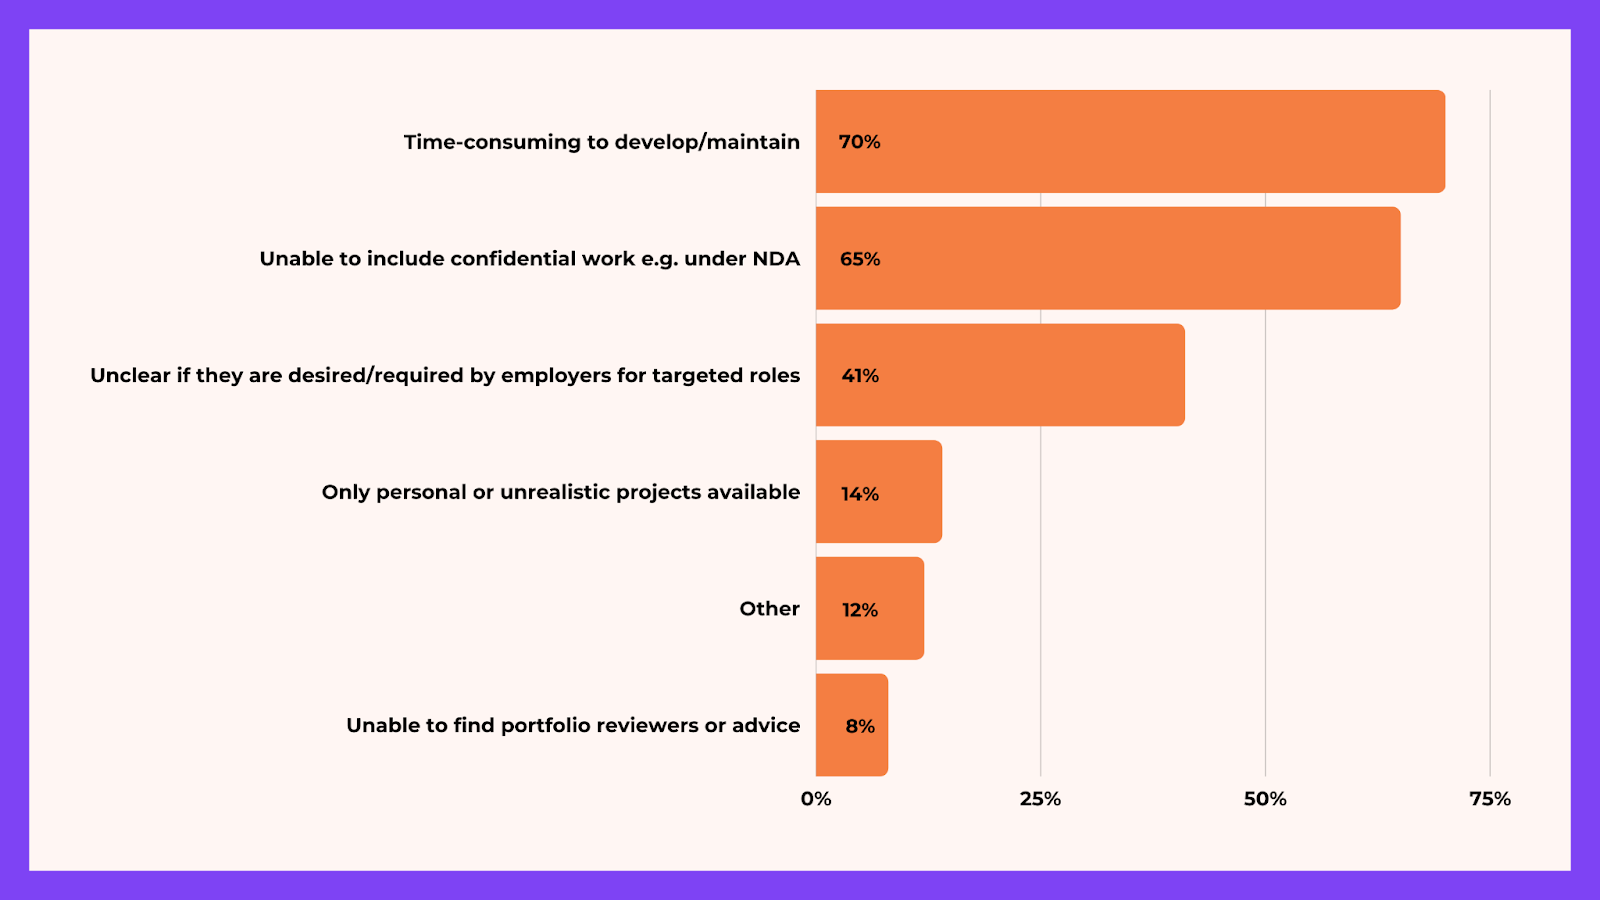  Bar charts representing the most common challenges faced by UXRs maintaining a portfolio; less common issues not described in text include unclear whether desired (41%), only personal or unrealistic projects available (14%), unable to find reviewers (8%), and other (14%).